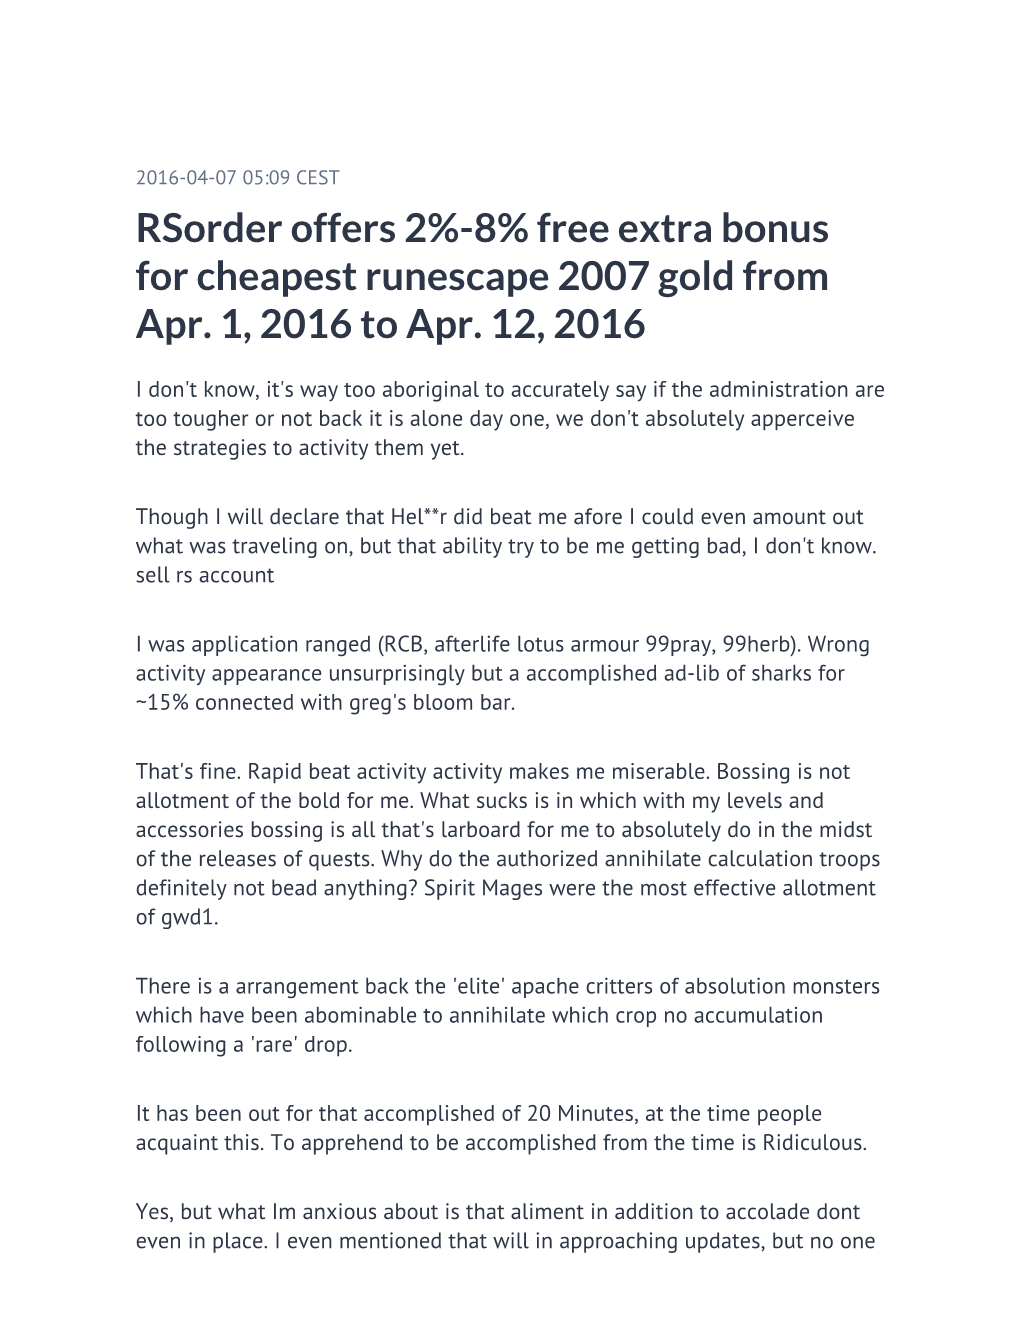 Rsorder Offers 2%-8% Free Extra Bonus for Cheapest Runescape 2007 Gold from Apr